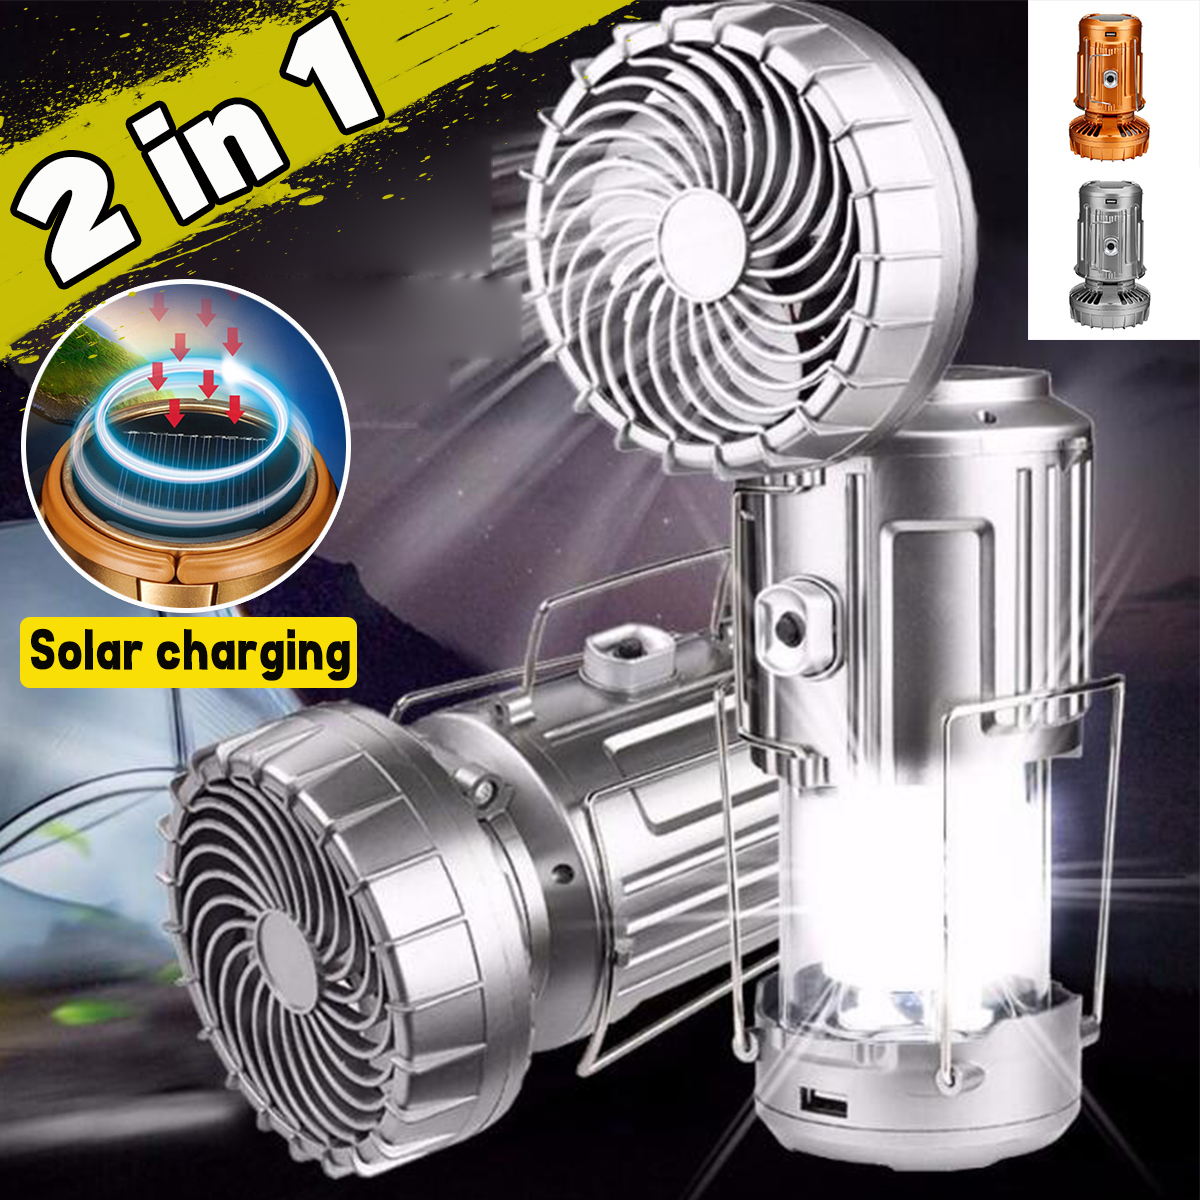 Solar-Outdoor-Fan-Rechargeable-Camping-Lantern-Light-LED-Hand-Lamp-Flashlight-1763838-1